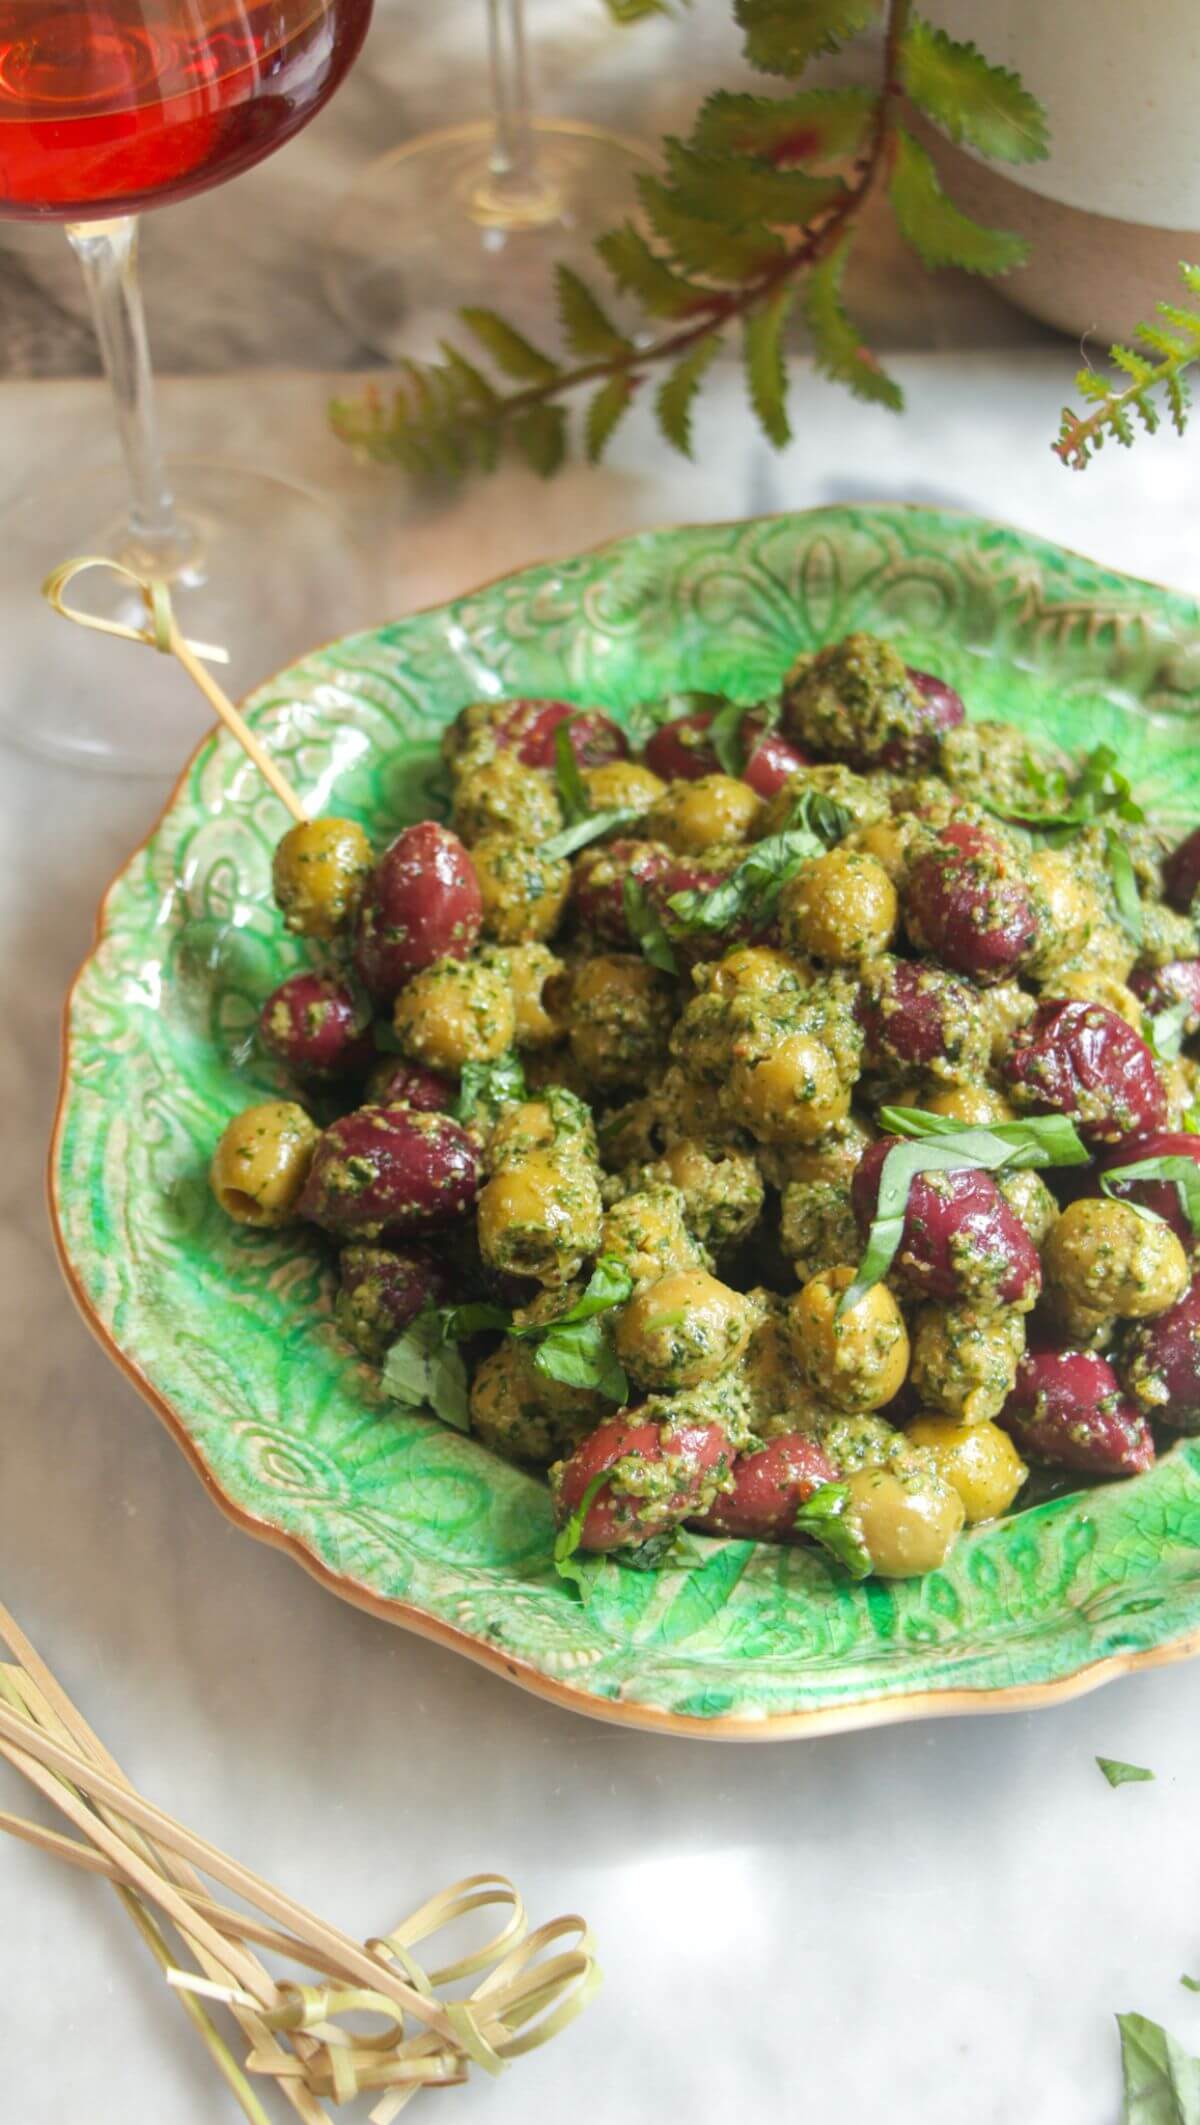 Pesto marinated olives on a small green plate with skewers on the side.